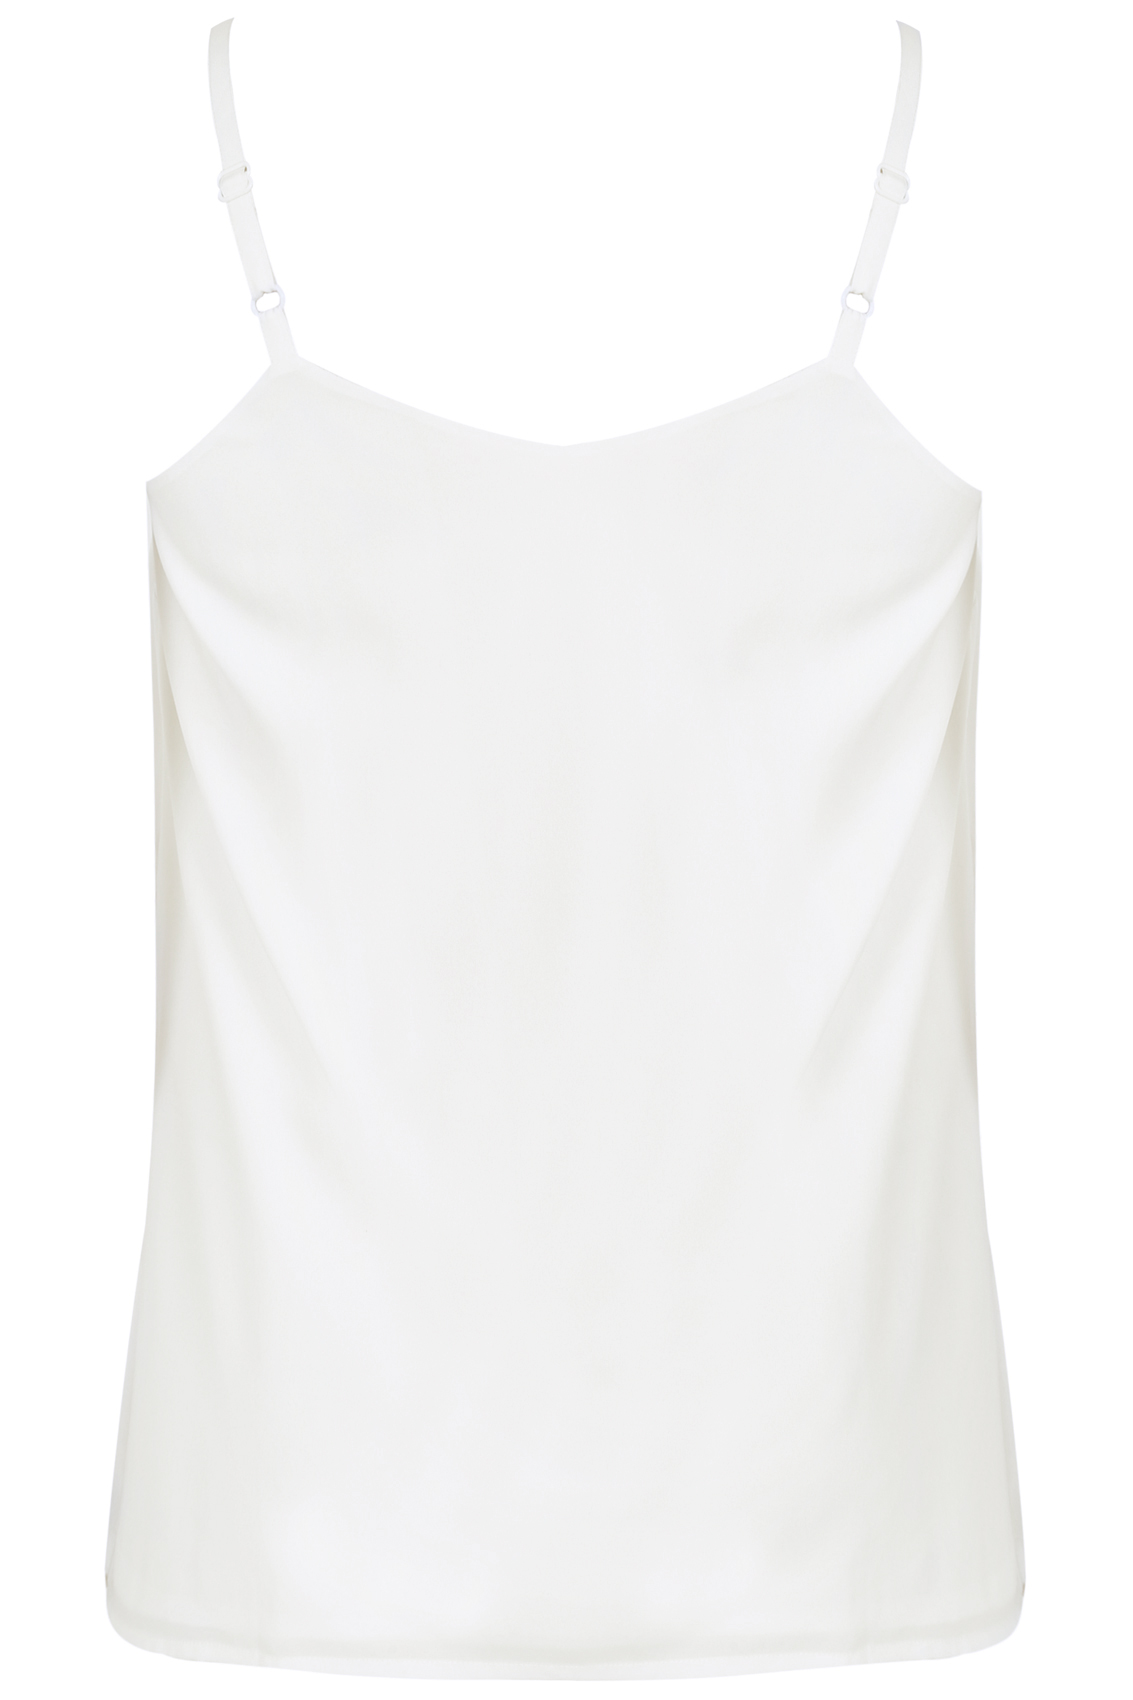 Ivory Woven Cami Top With Side Splits, Plus Size 16 to 36